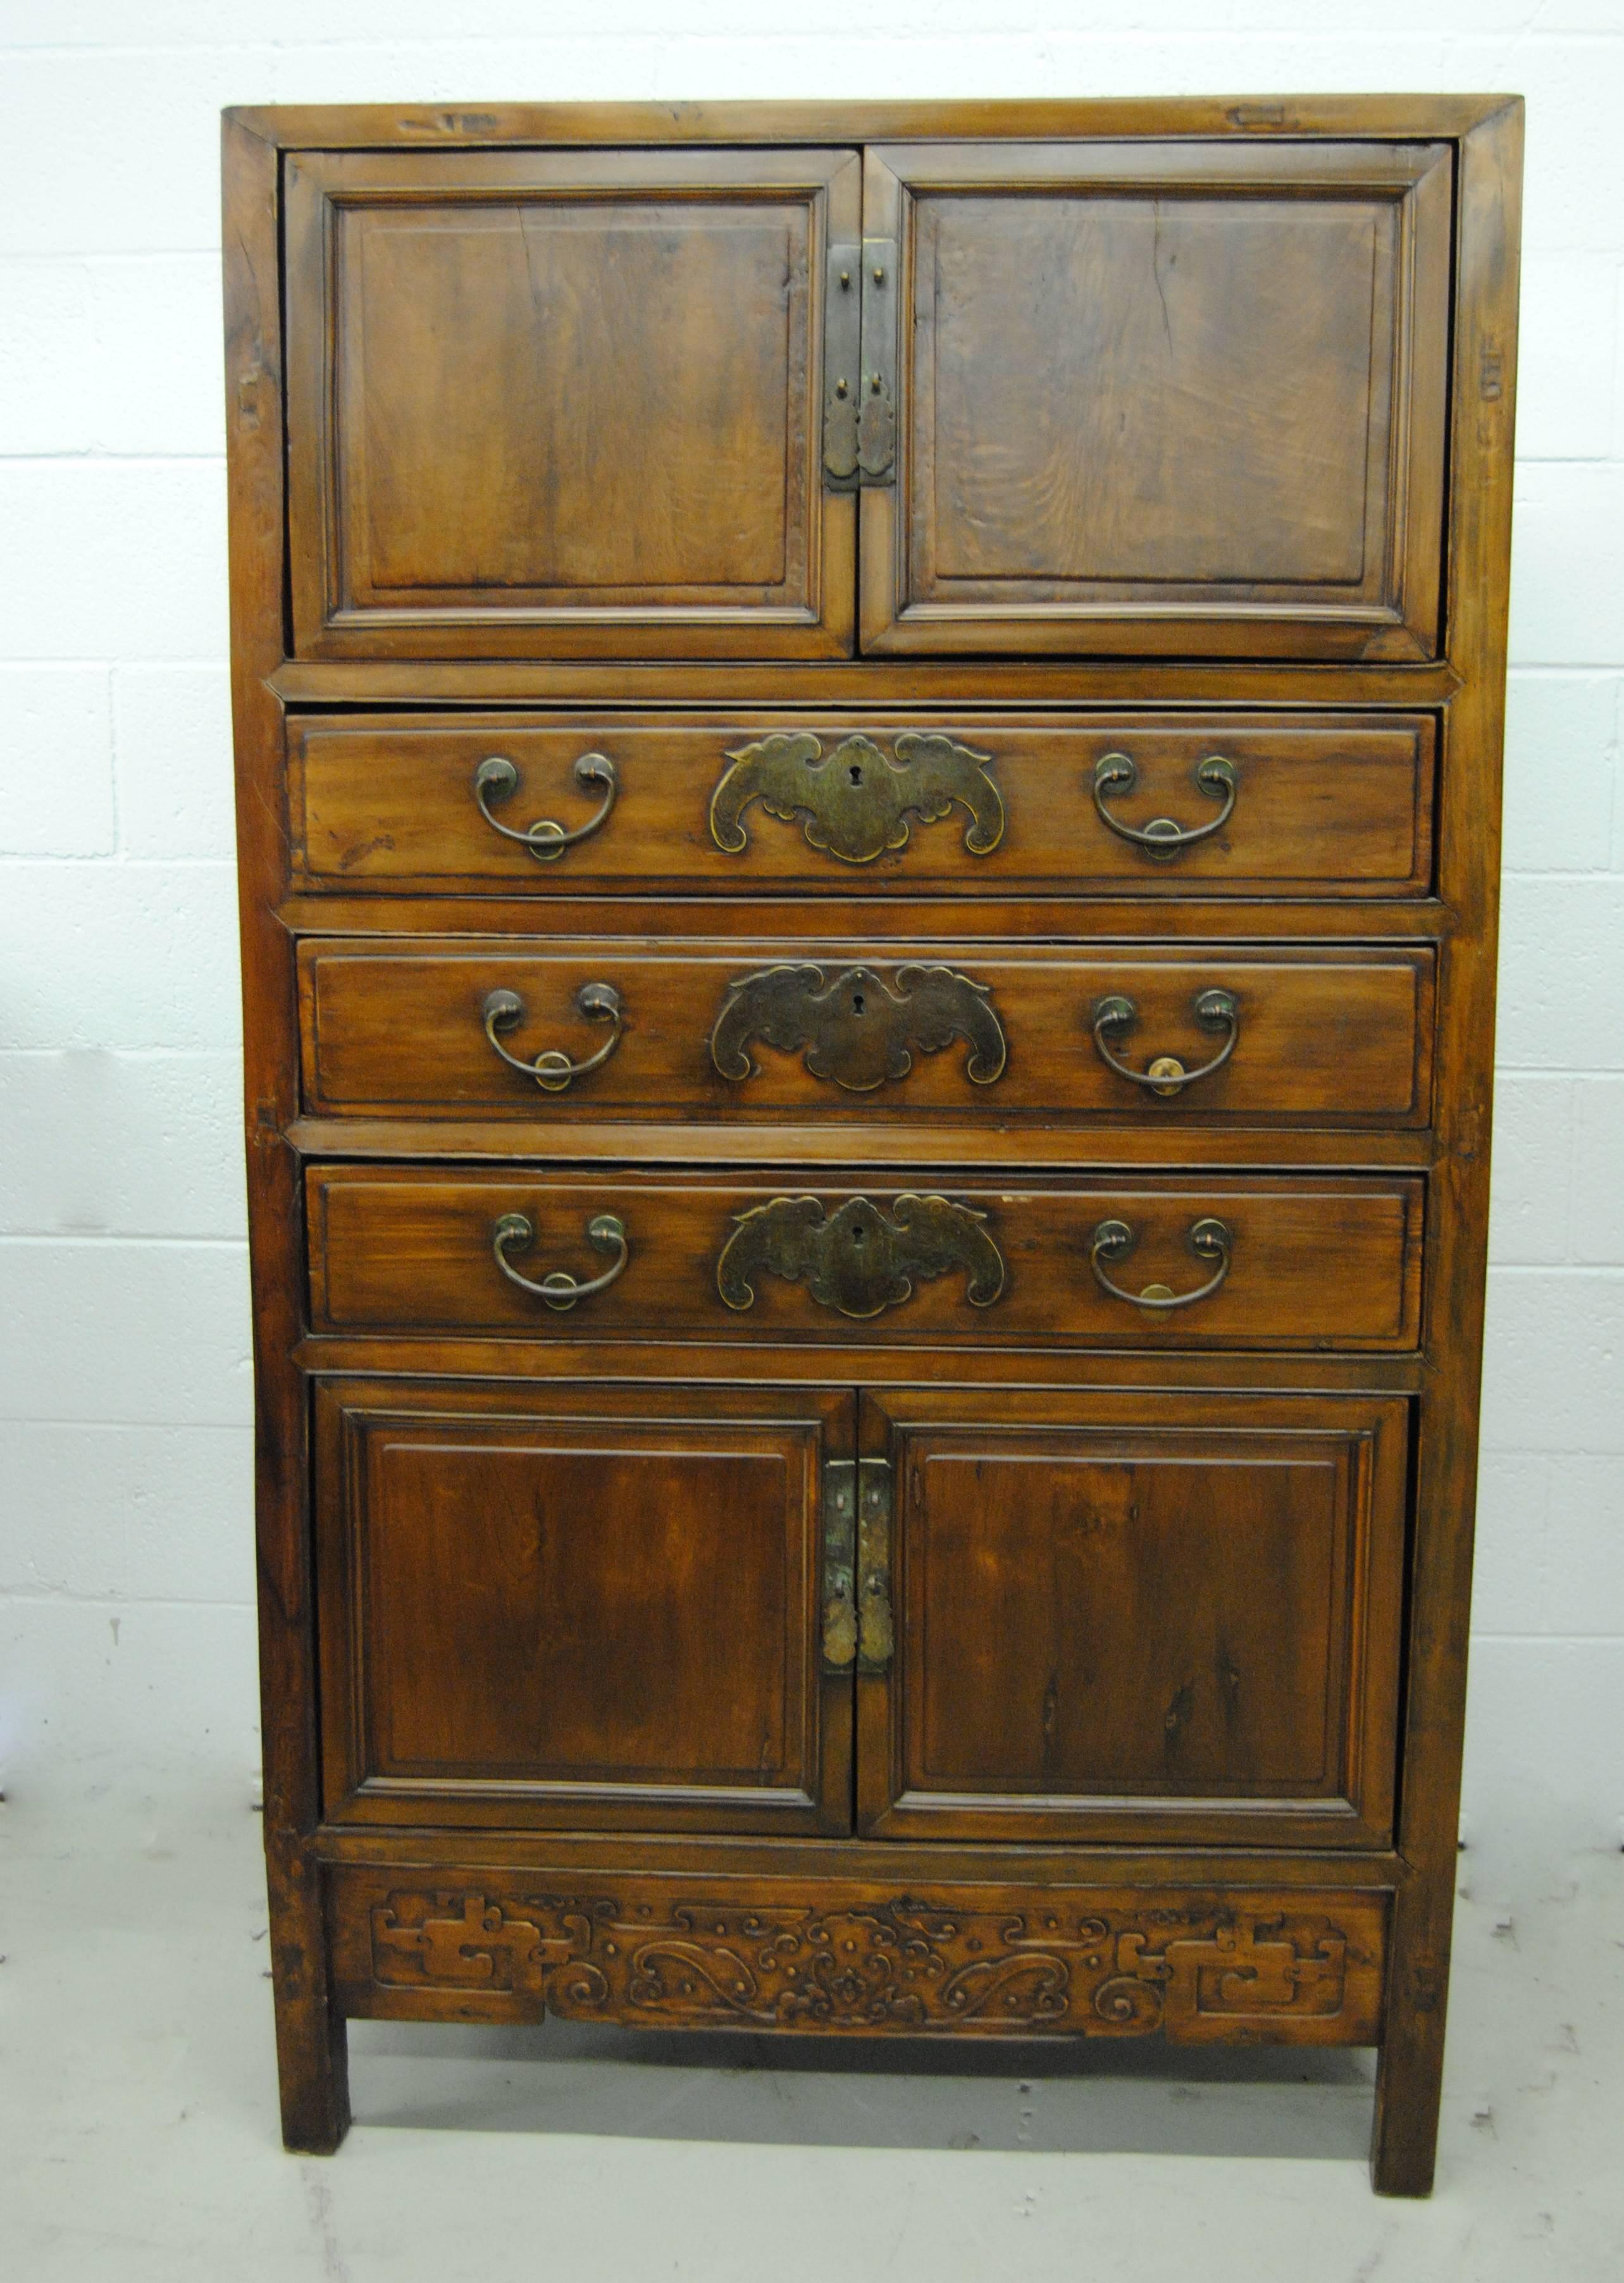 19th century double bay, three-drawer tall cabinet with original finish. Very nicely hand-carved lower apron. The outstanding hardware is original to the piece. The Nan Mu has a beautiful grain, rich color.